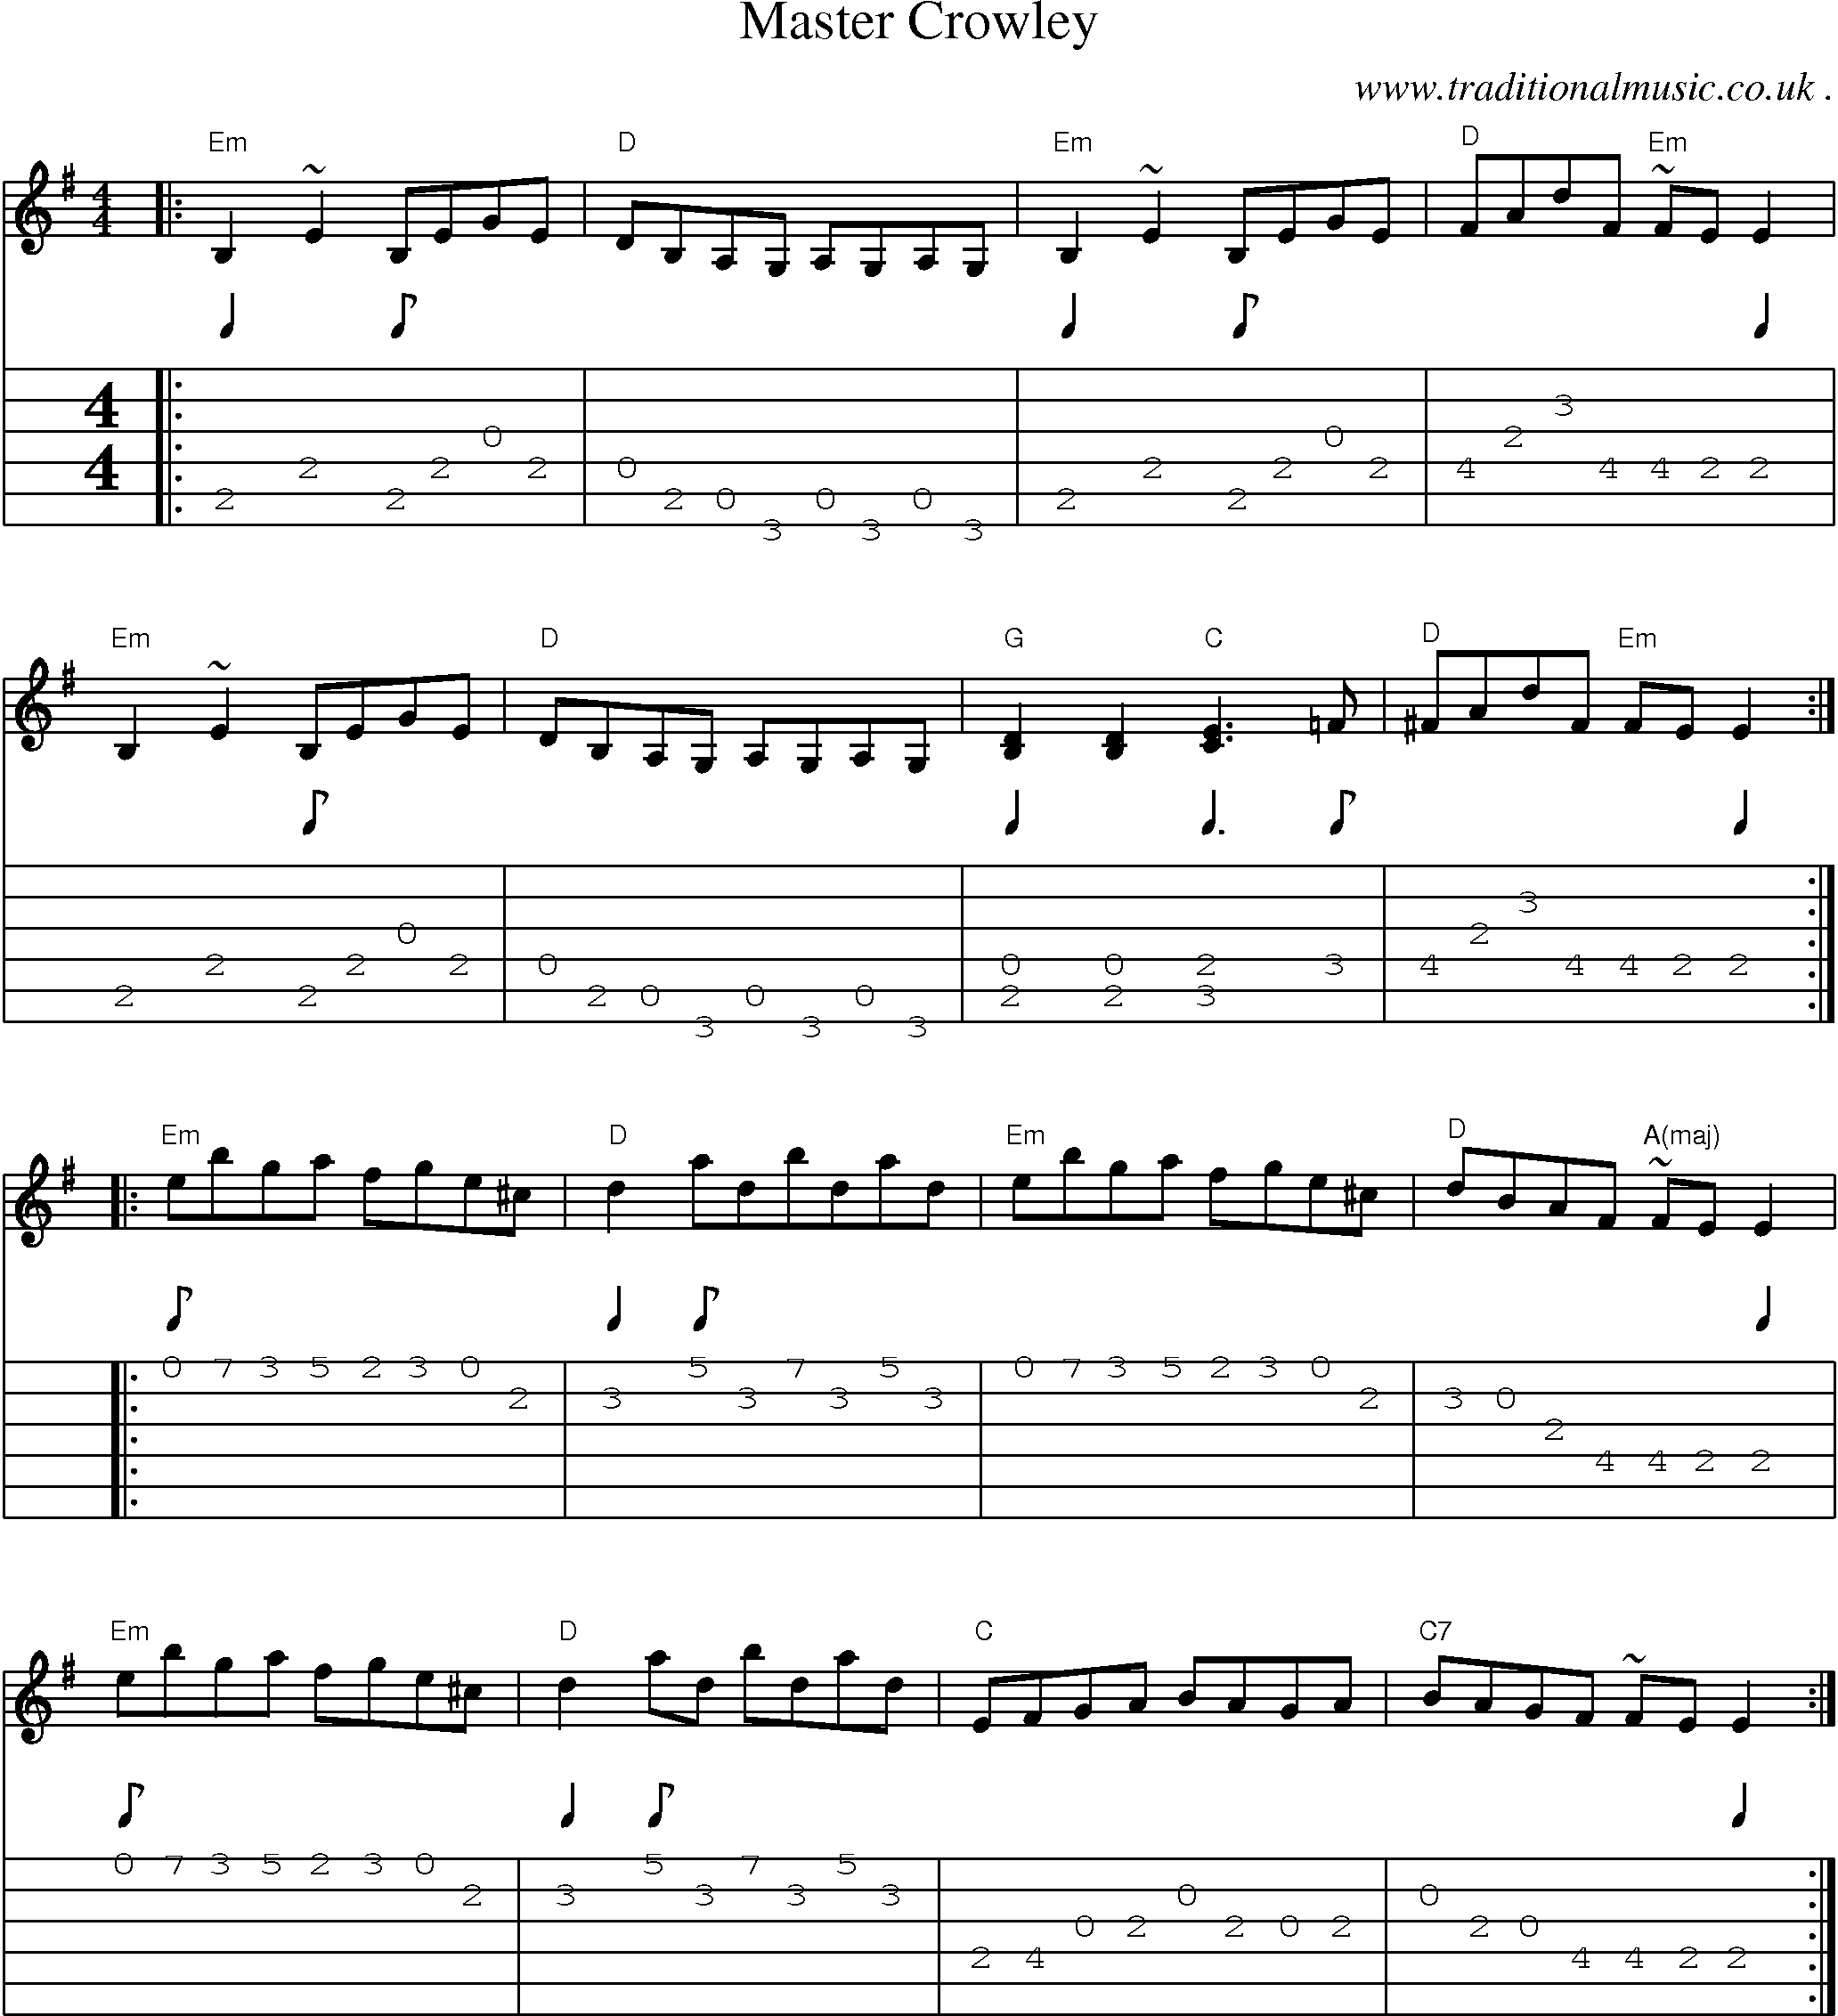 Music Score and Guitar Tabs for Master Crowley